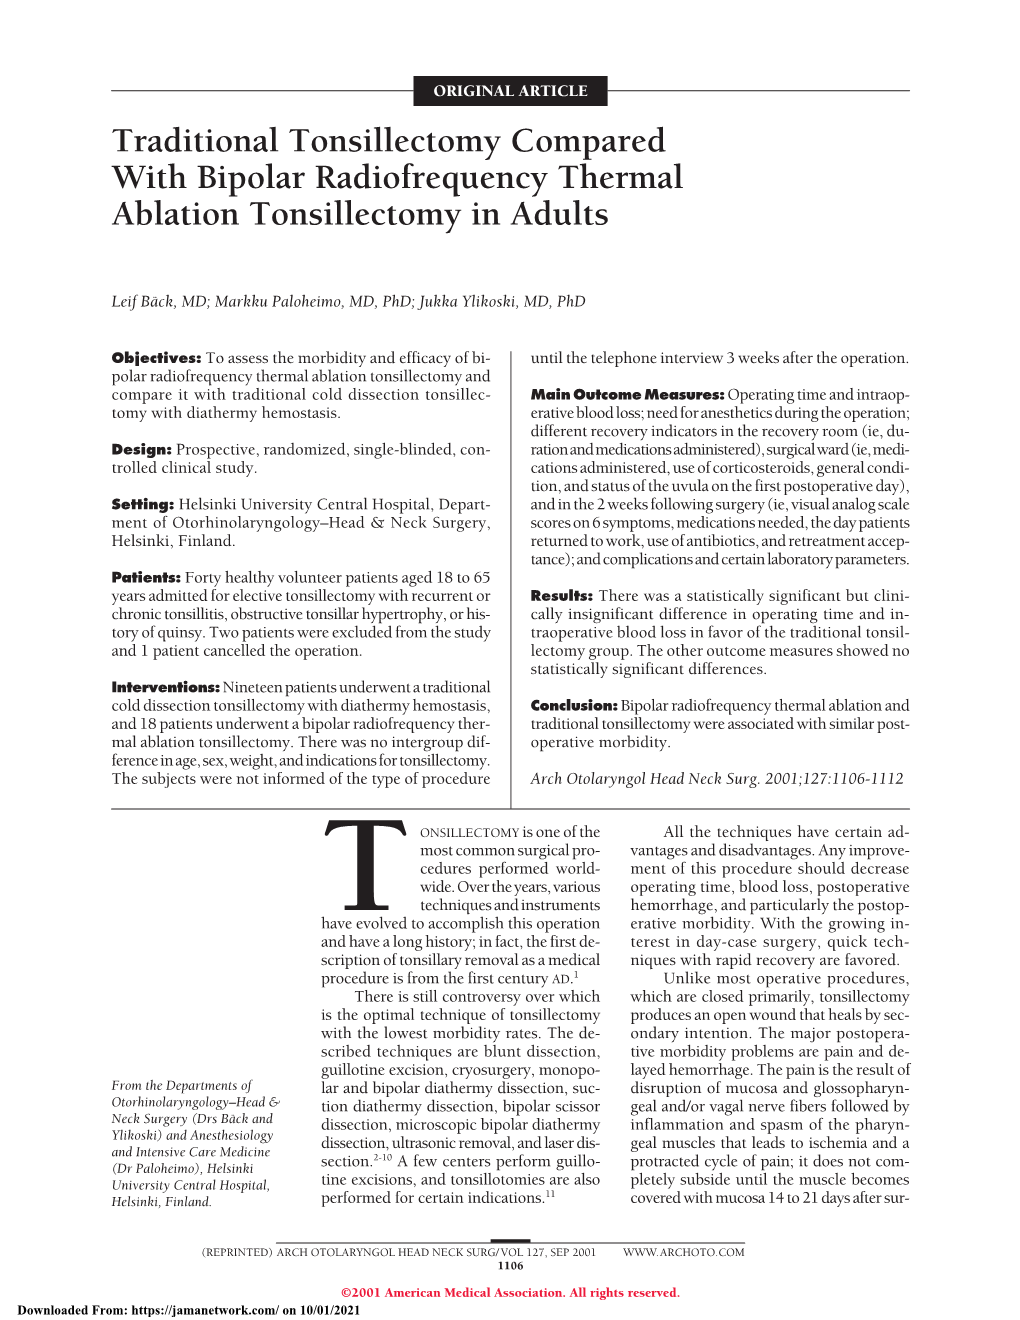 Tonsillectomy Compared with Bipolar Radiofrequency Thermal Ablation Tonsillectomy in Adults a Pilot Study